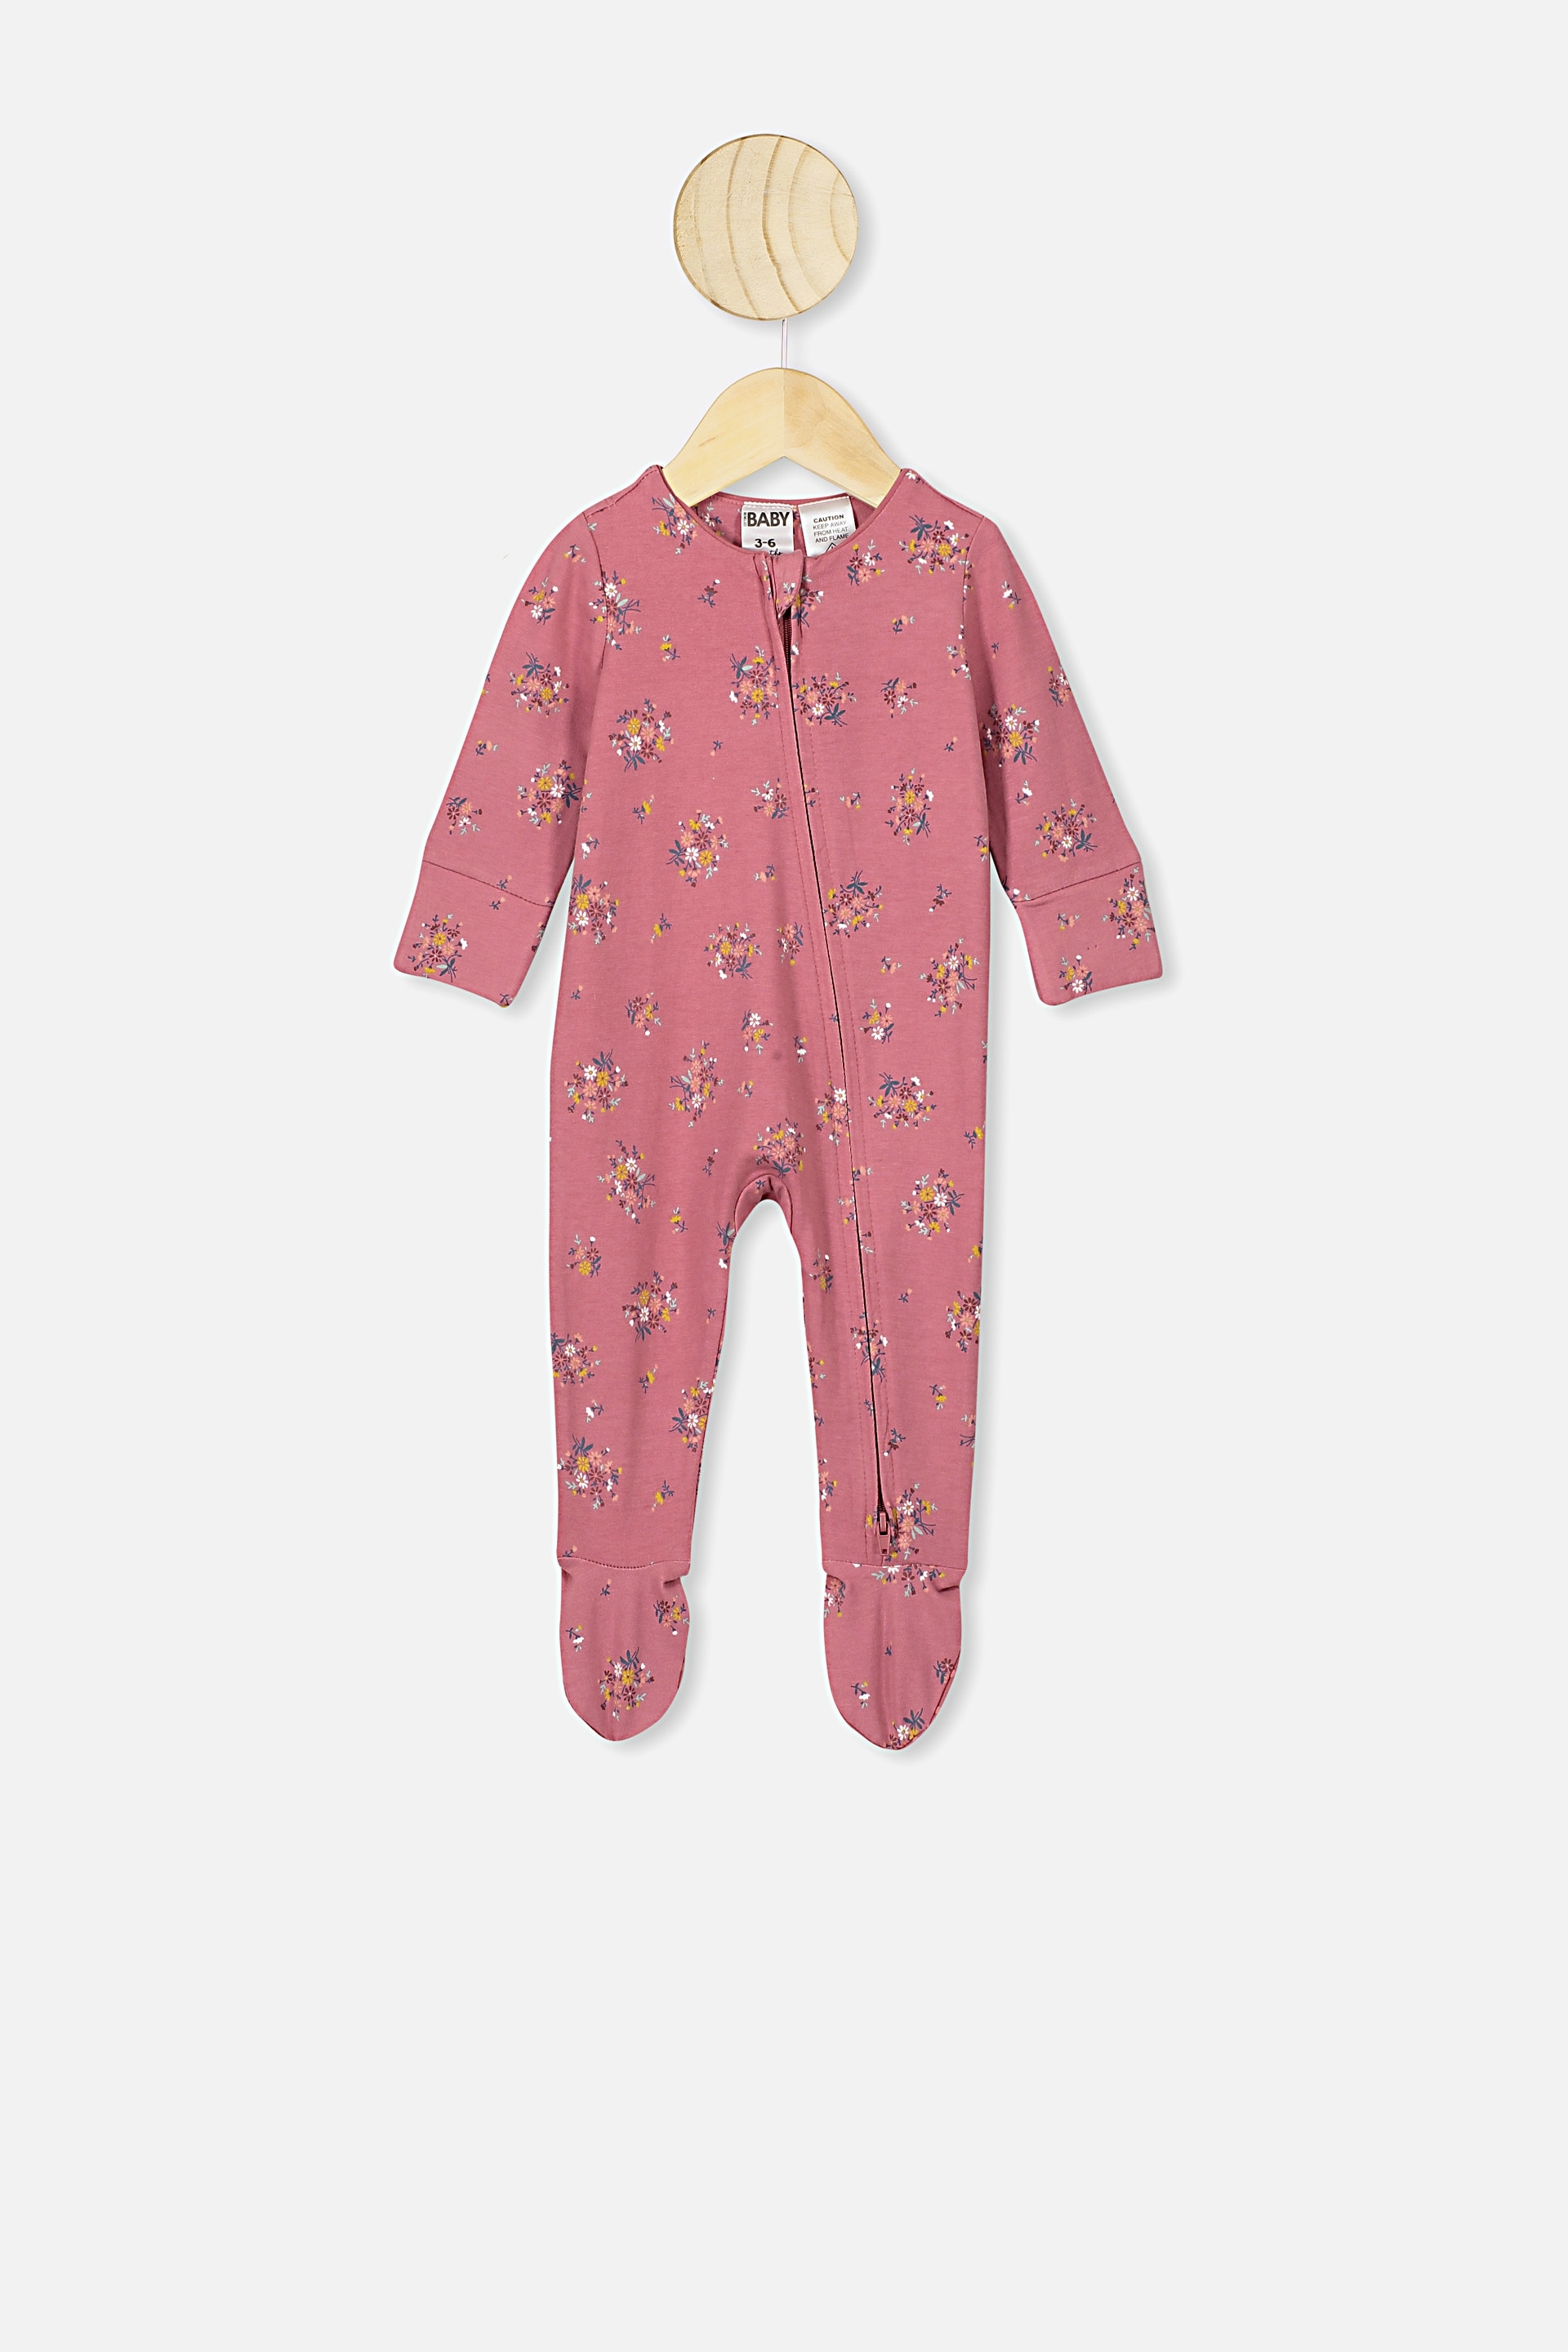 baby sleepsuits with grippy feet